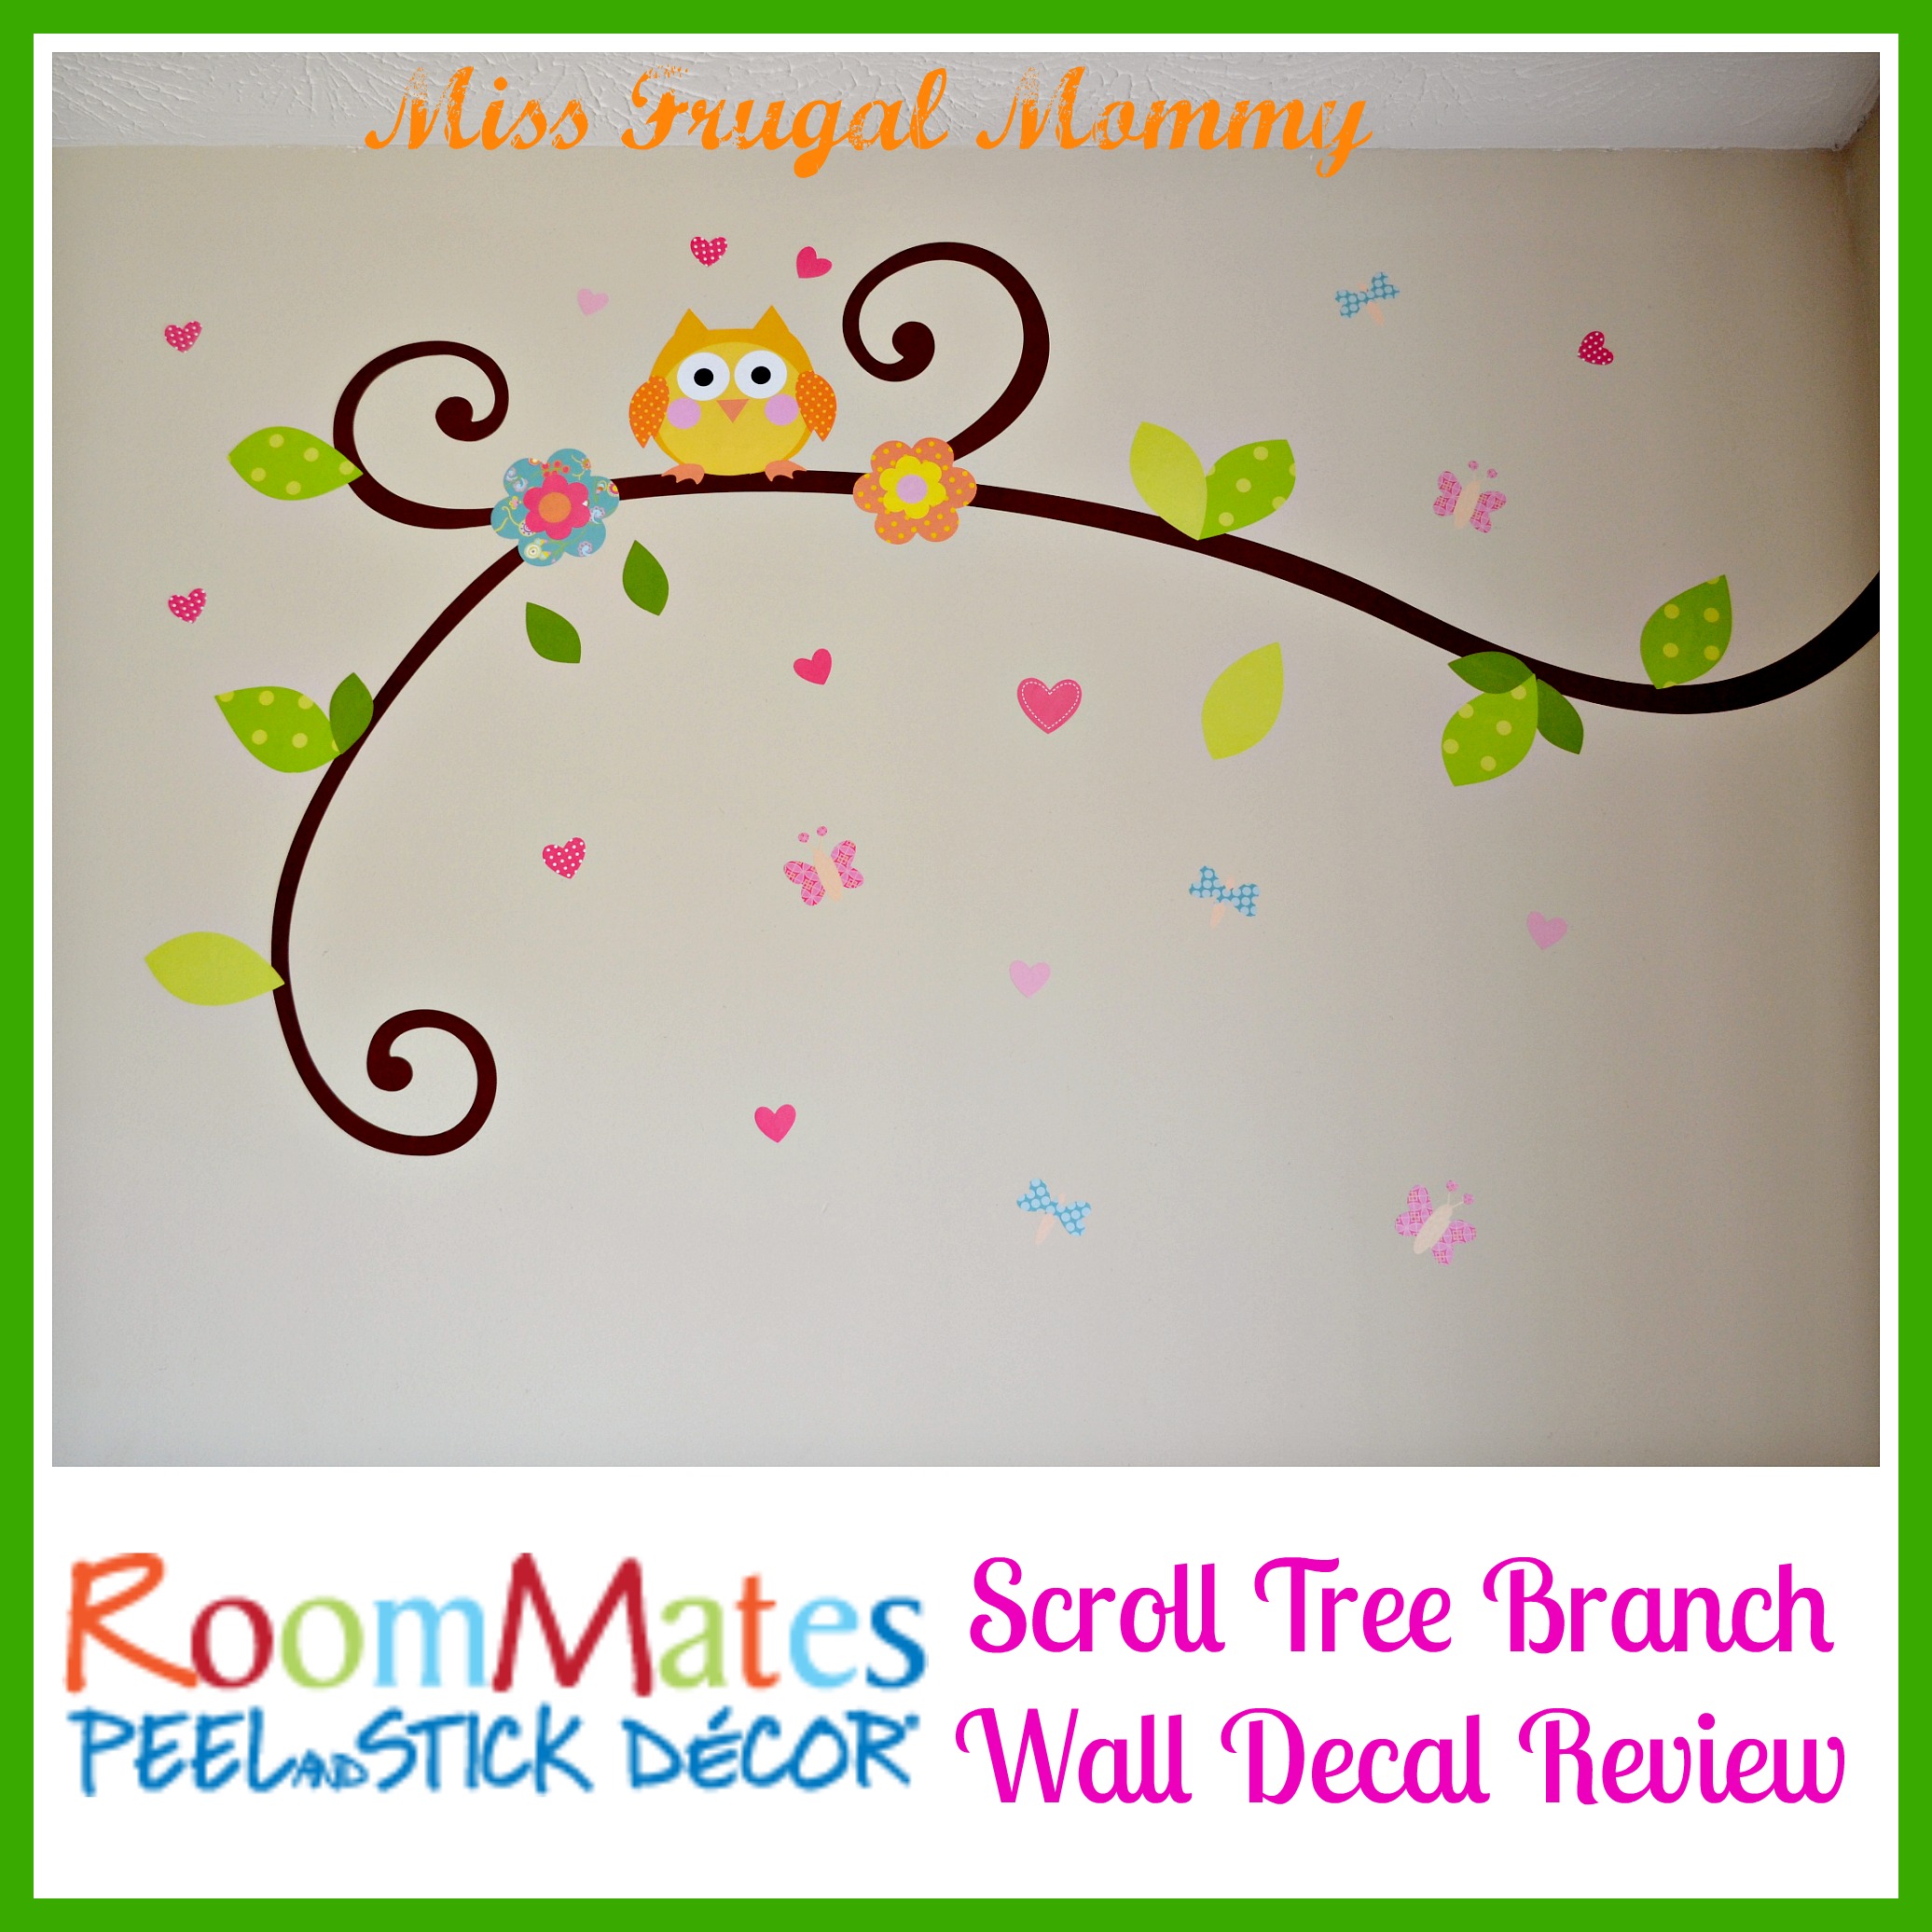 RoomMates Scroll Tree Branch Wall Decal Review (Getting Ready For Baby Gift Guide)